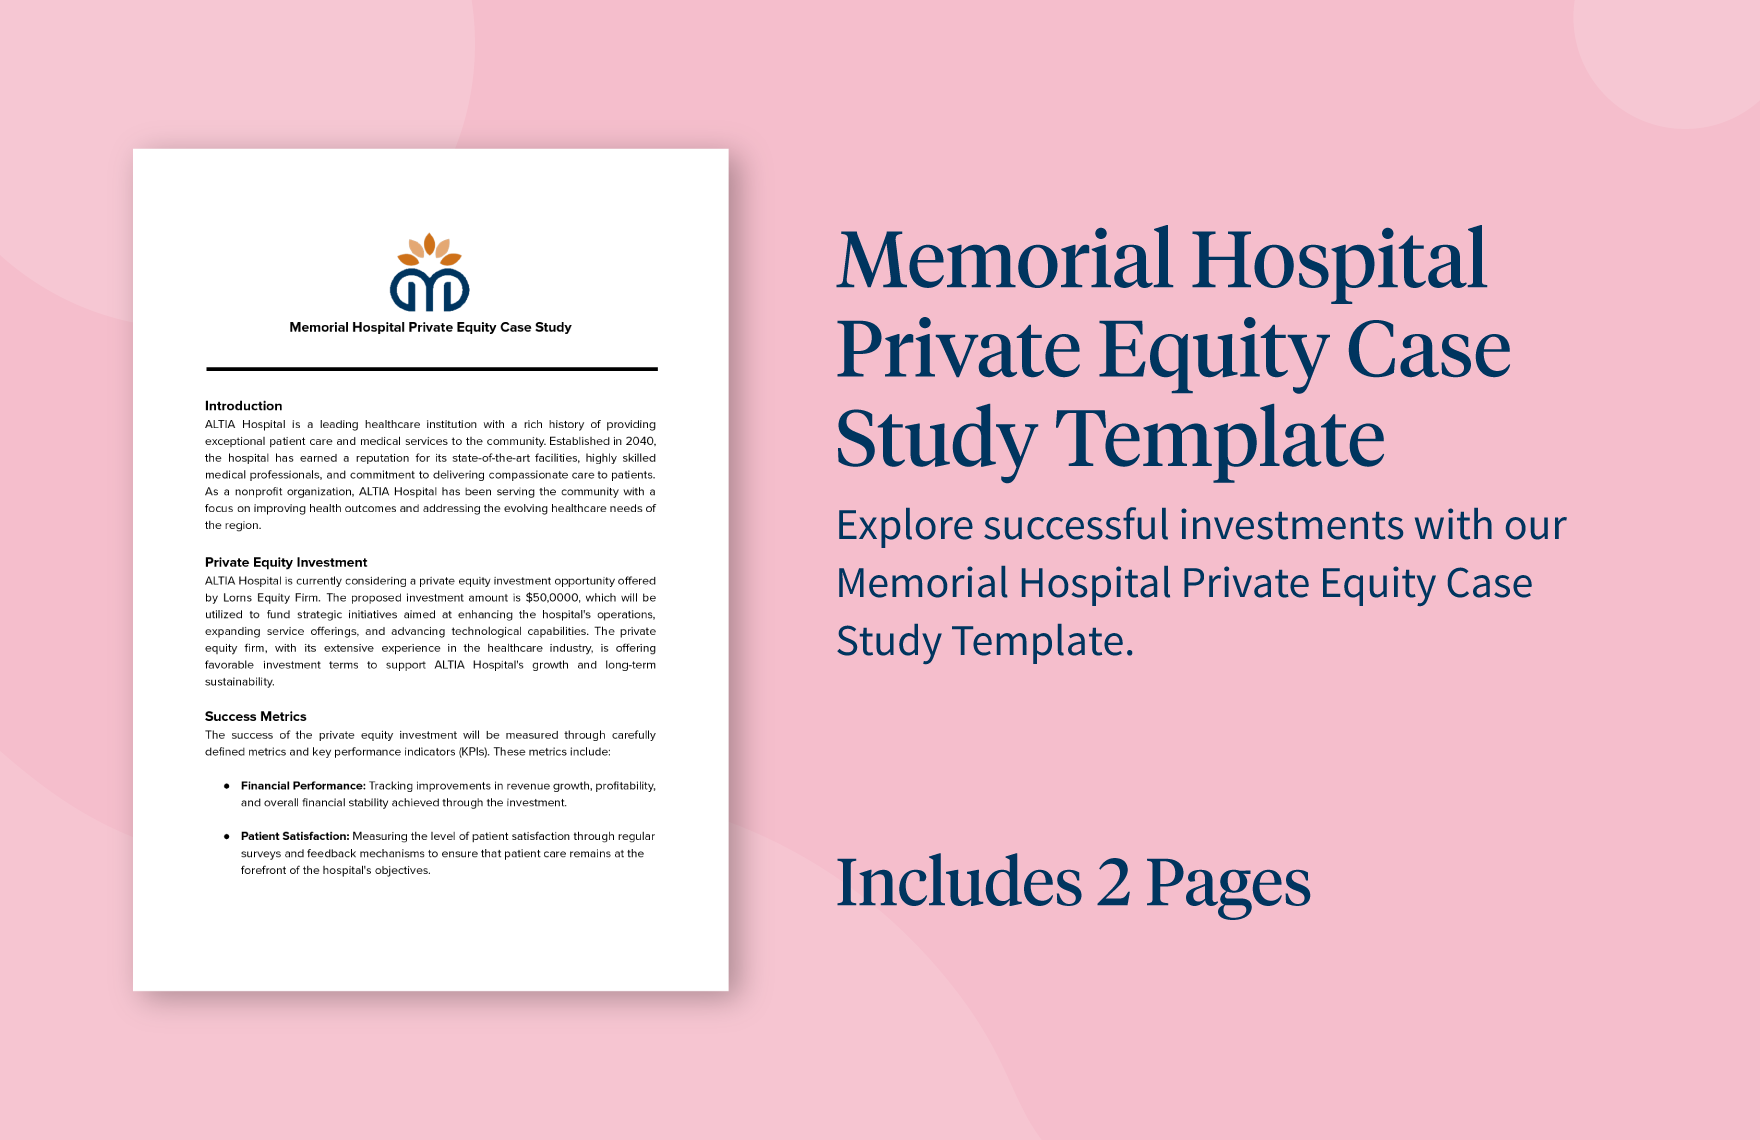 Memorial Hospital Private Equity Case Study Template